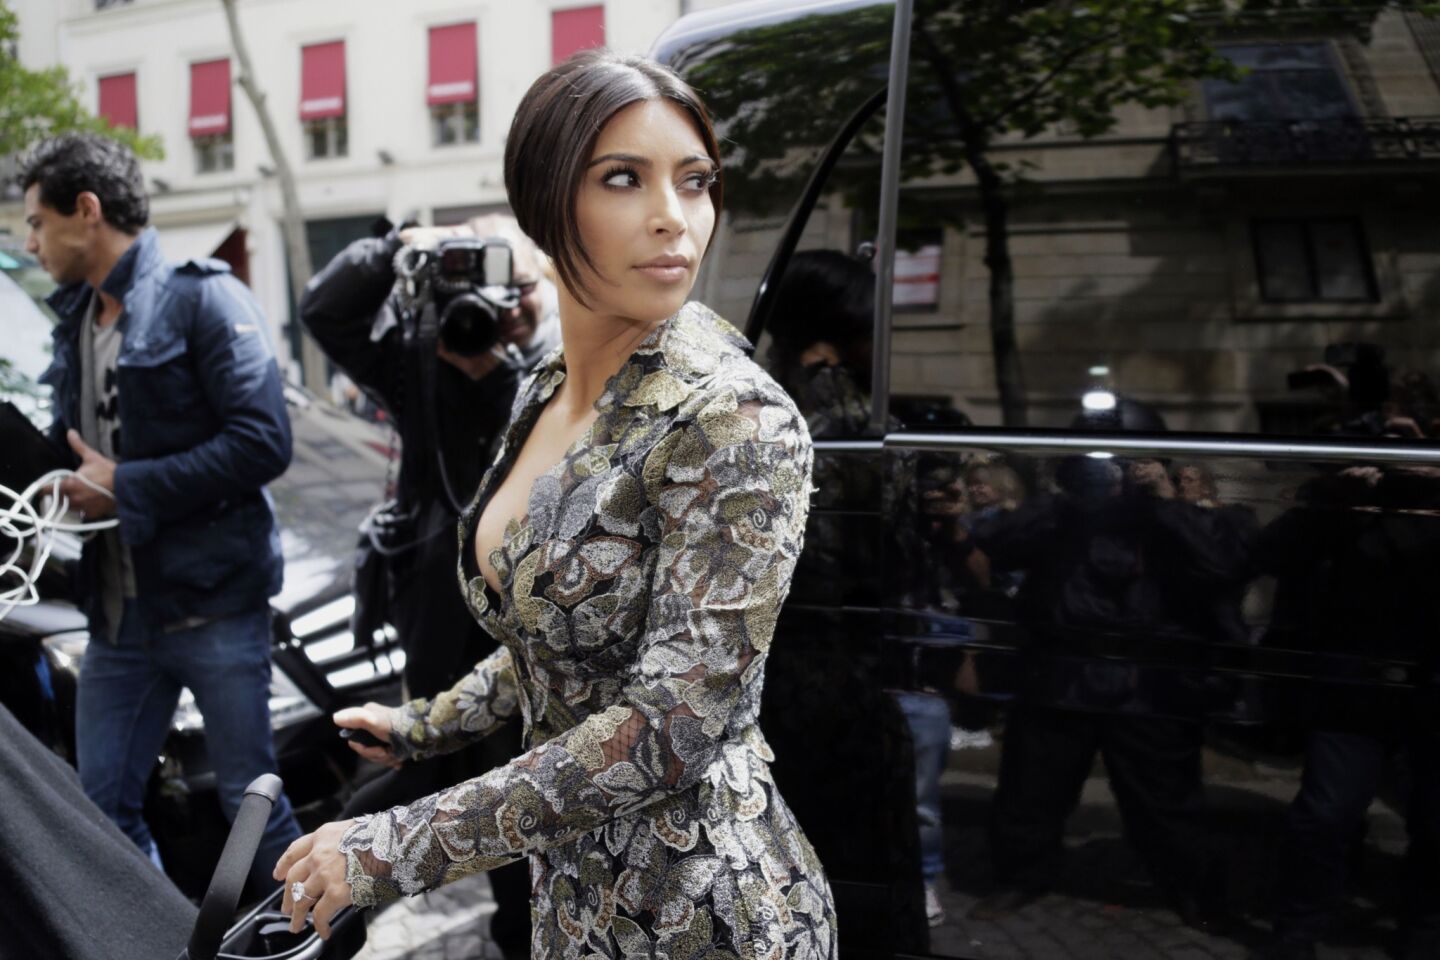 Kim Kardashian is dressed for brunch with designer Valentino as she leaves her Paris hotel on May 23.